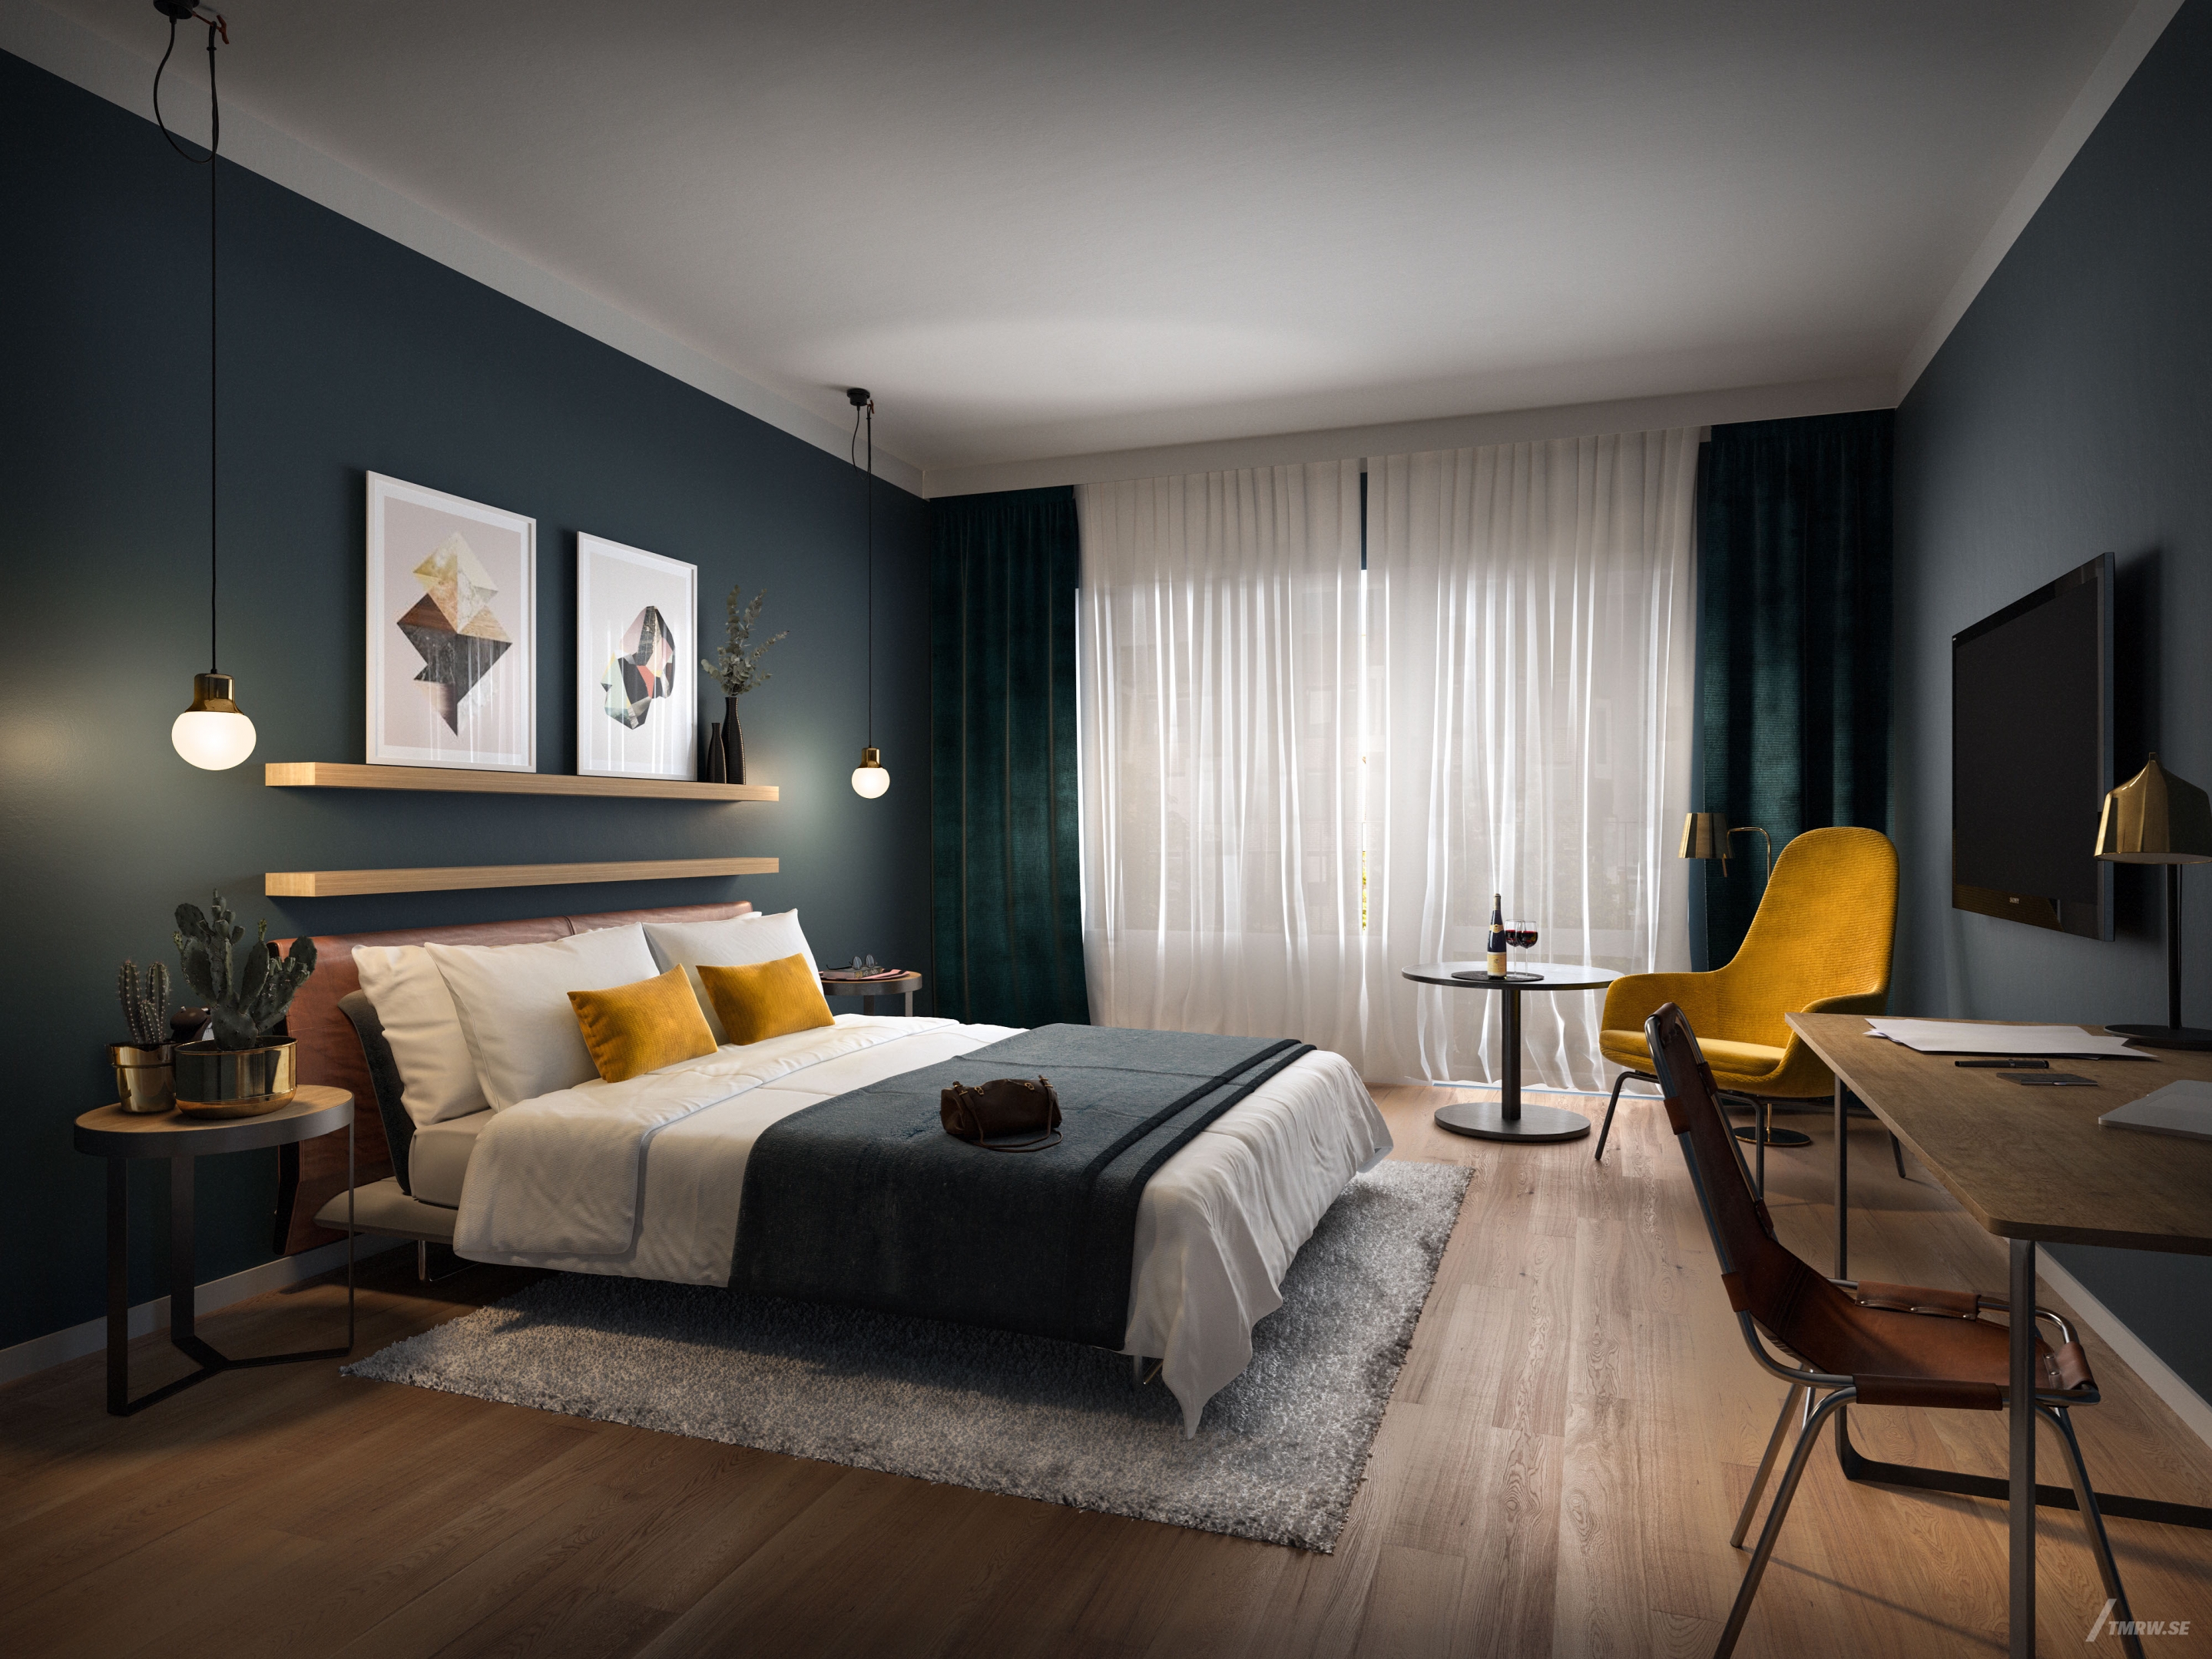 Architectural visualization of Hotell Lund for Veidekke. An image of the interior of a hotel room in daylight.